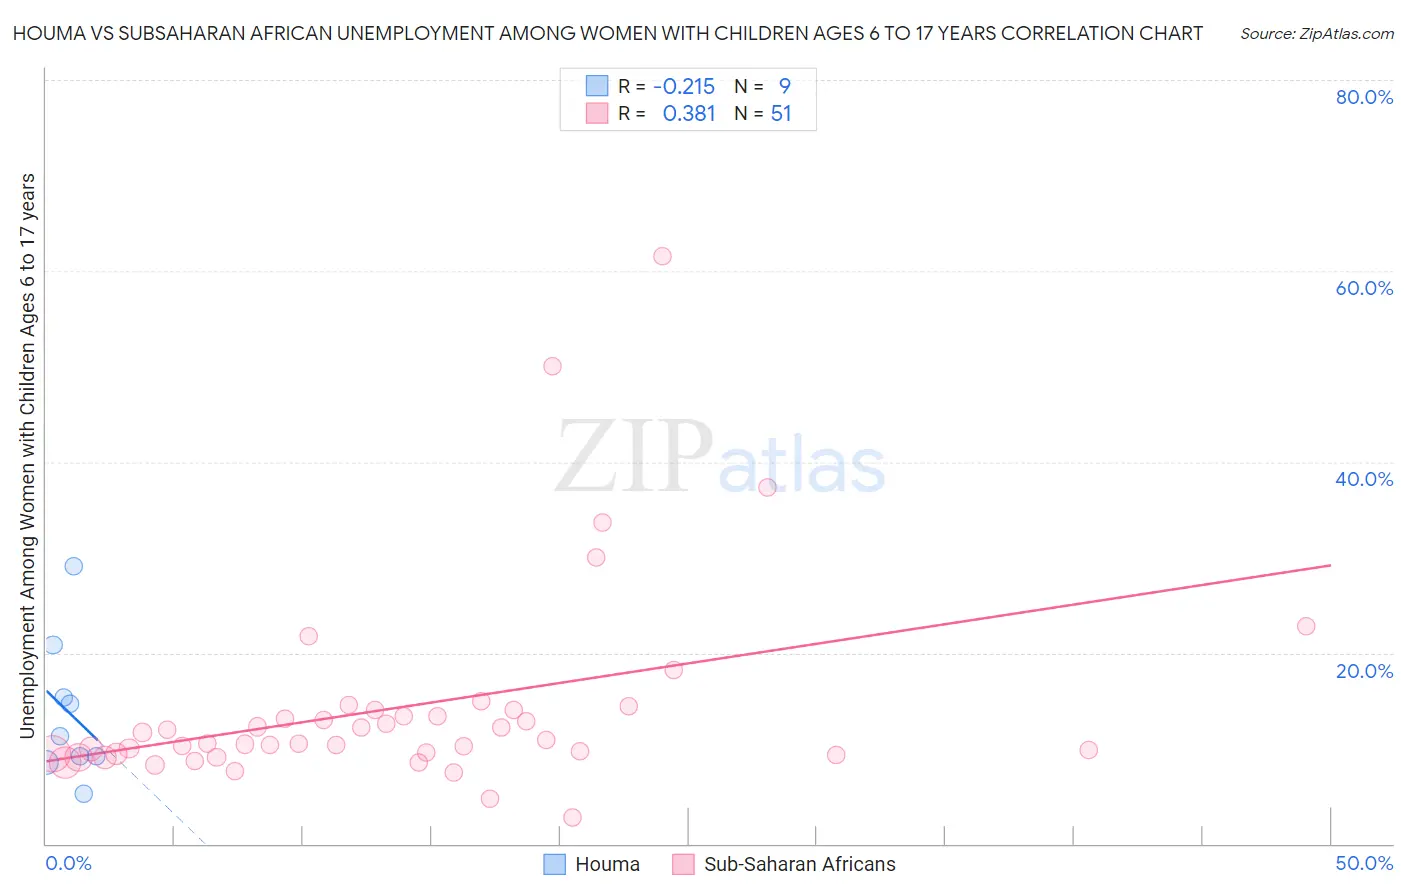 Houma vs Subsaharan African Unemployment Among Women with Children Ages 6 to 17 years